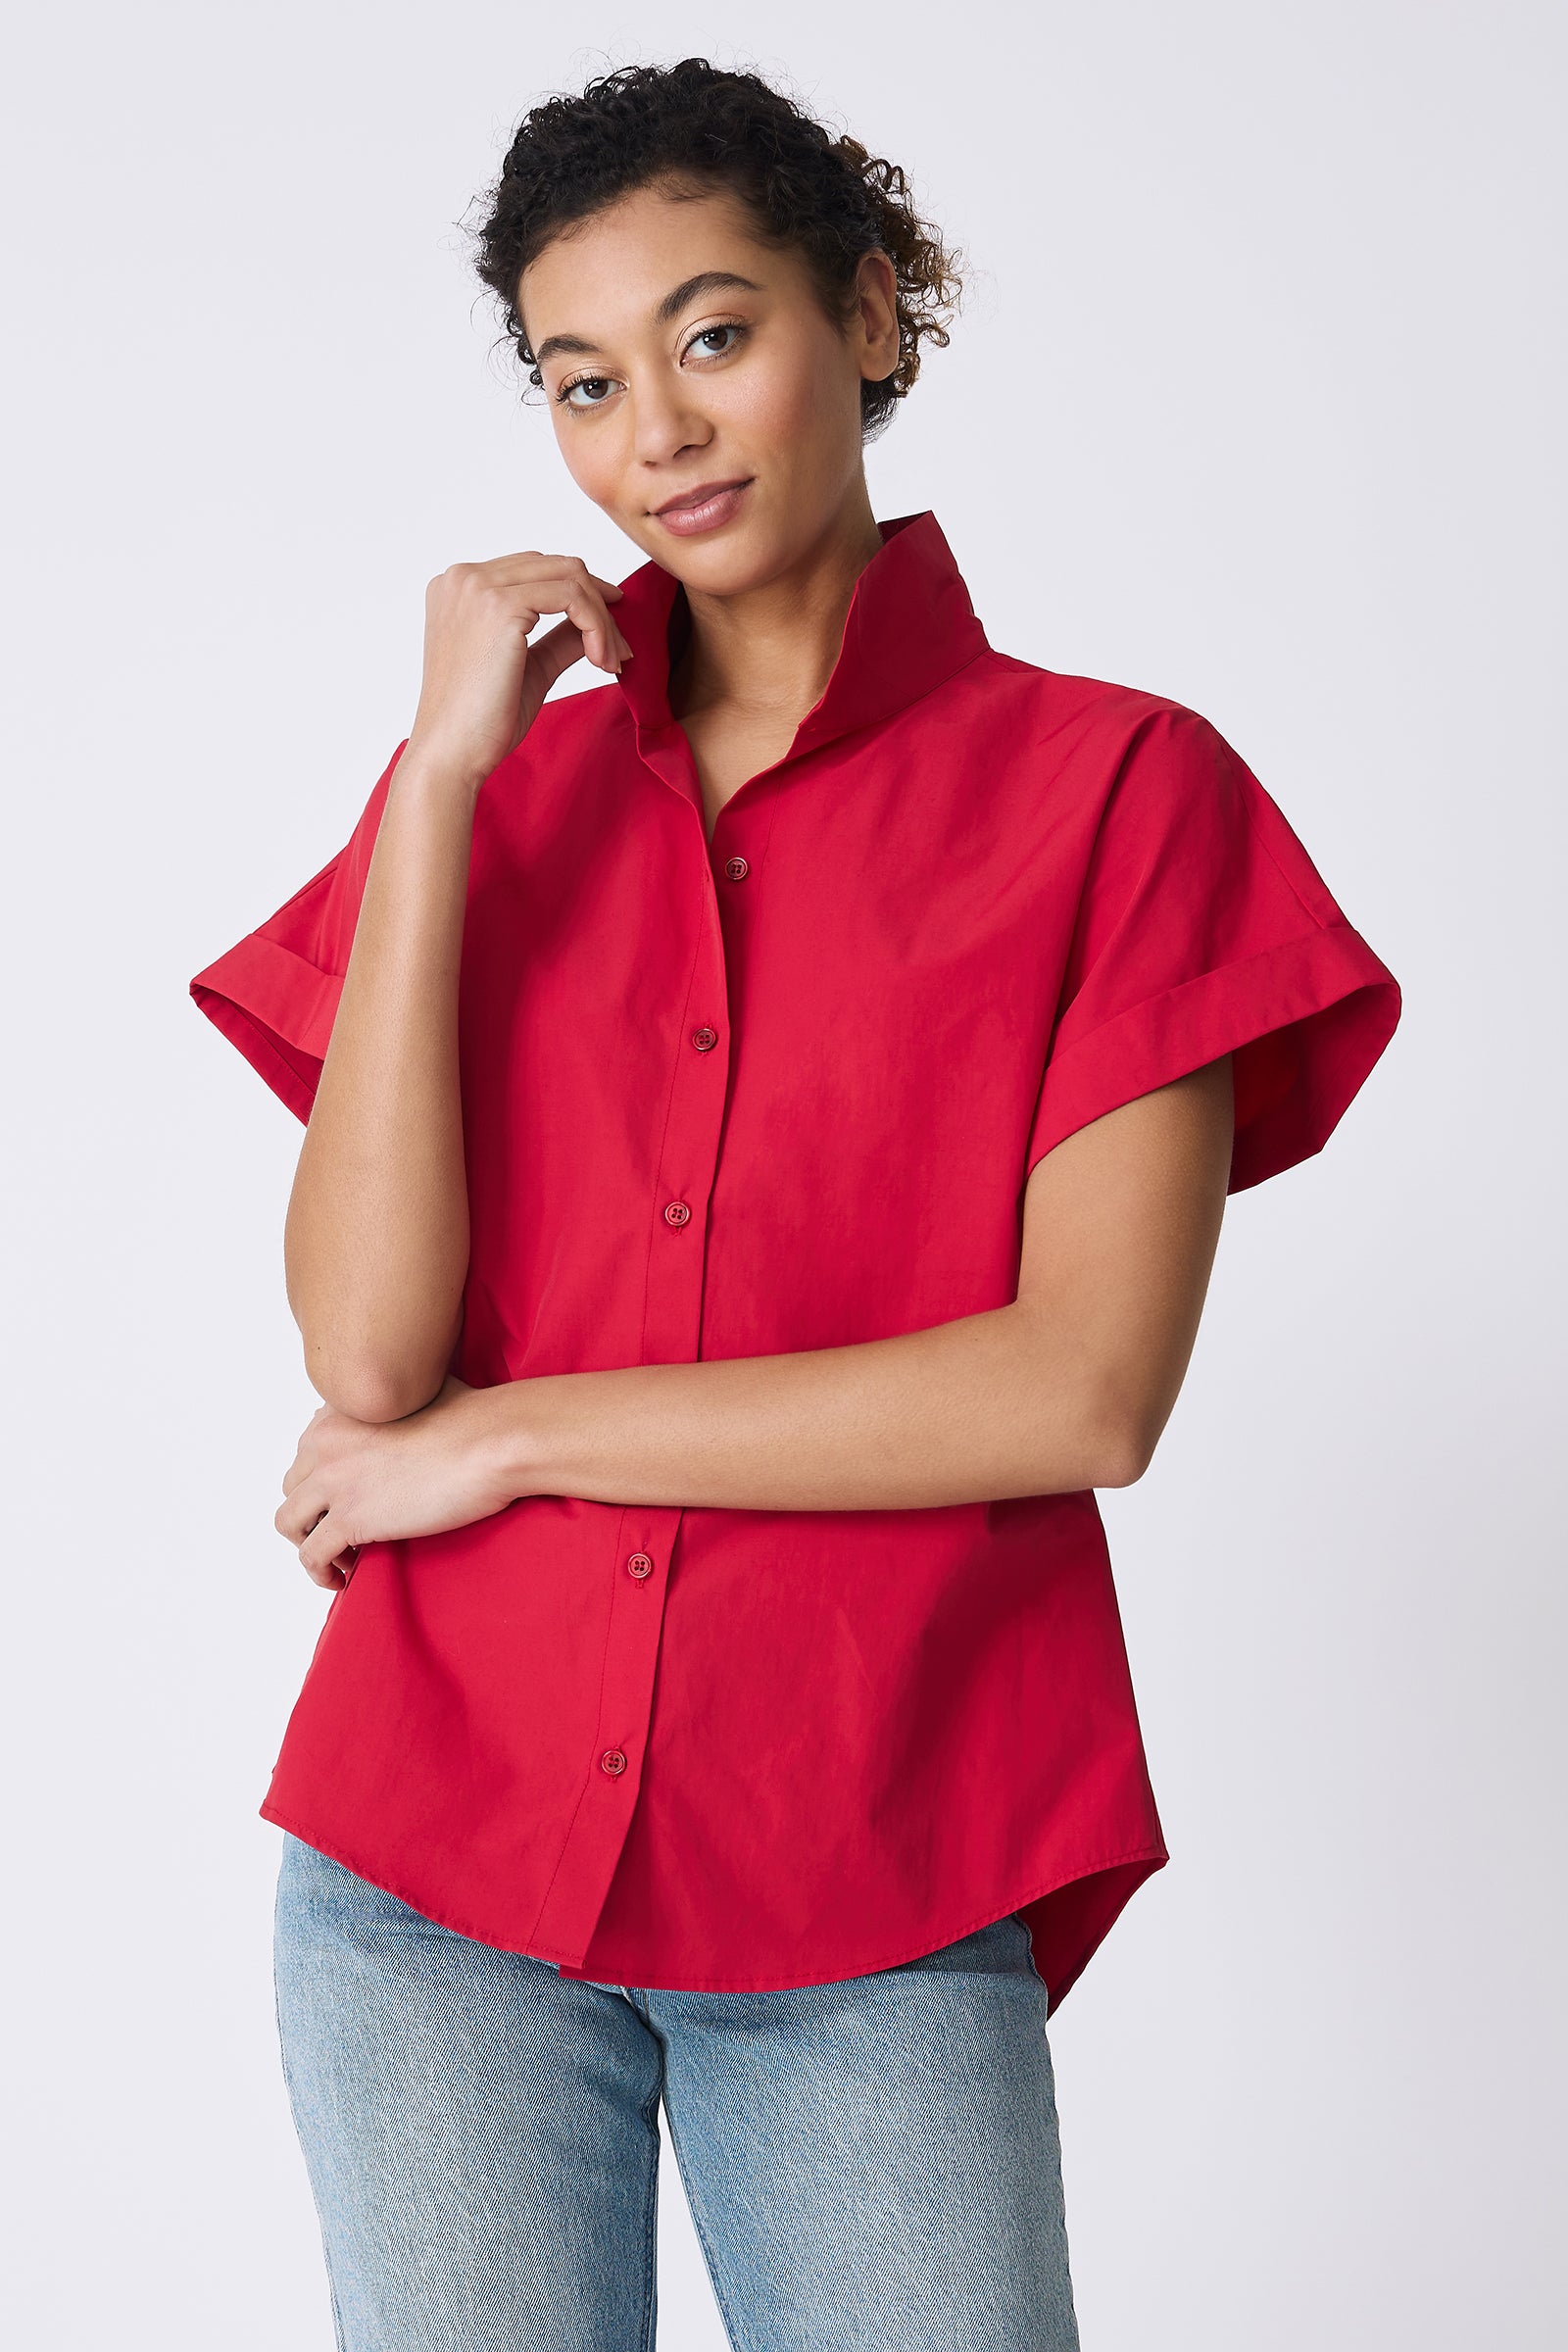 Kal Rieman Ali Kimono Top in Red on model touching collar front view